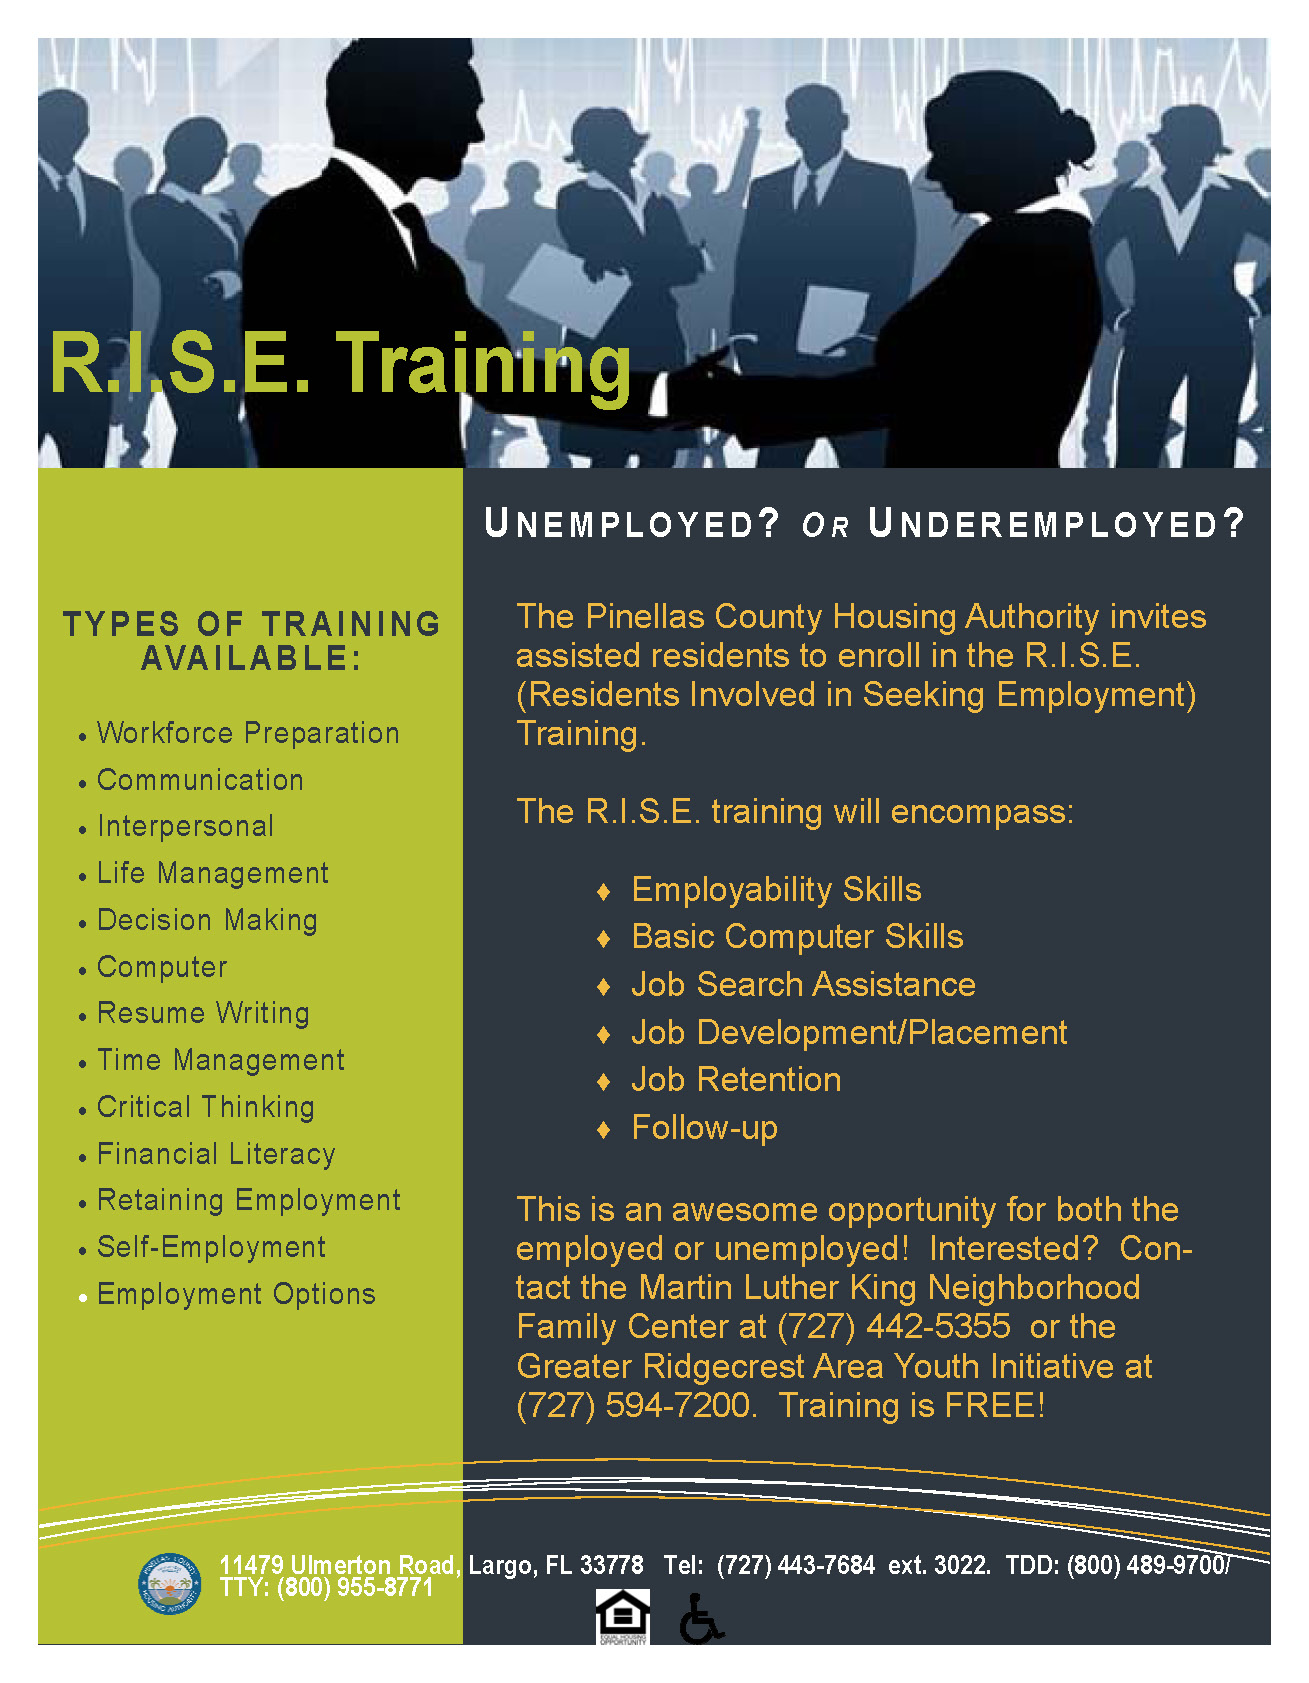 R I S E Training Flyer. types of training available: workplace preparation, communication, interpersonal, life management, decision making, computer, resume writing, time management, critical thinking, financial literacy, retaining employment, self-employment, employment options. unemployed? or underemployed? the pinellas county housing authority invites assisted residents to enroll in the r.i.s.e. (residents involved in seeking employment) training. The r.i.s.e. training will encompass: employability skills, basic computer, skills,job search assistance, job development/placement, job retention, follow-up. this is an awesome opportunity for both the employed or unemployed! interested? contact the martin luther king neighborhood family center at 727-442-5355 or the greater redgecrest area youth initiative at 727-594-7200 training is free -11479 ulmerton road largo fl. 33778 tel: 727-443-7684 ext 3022. tdd: 800-489-9700